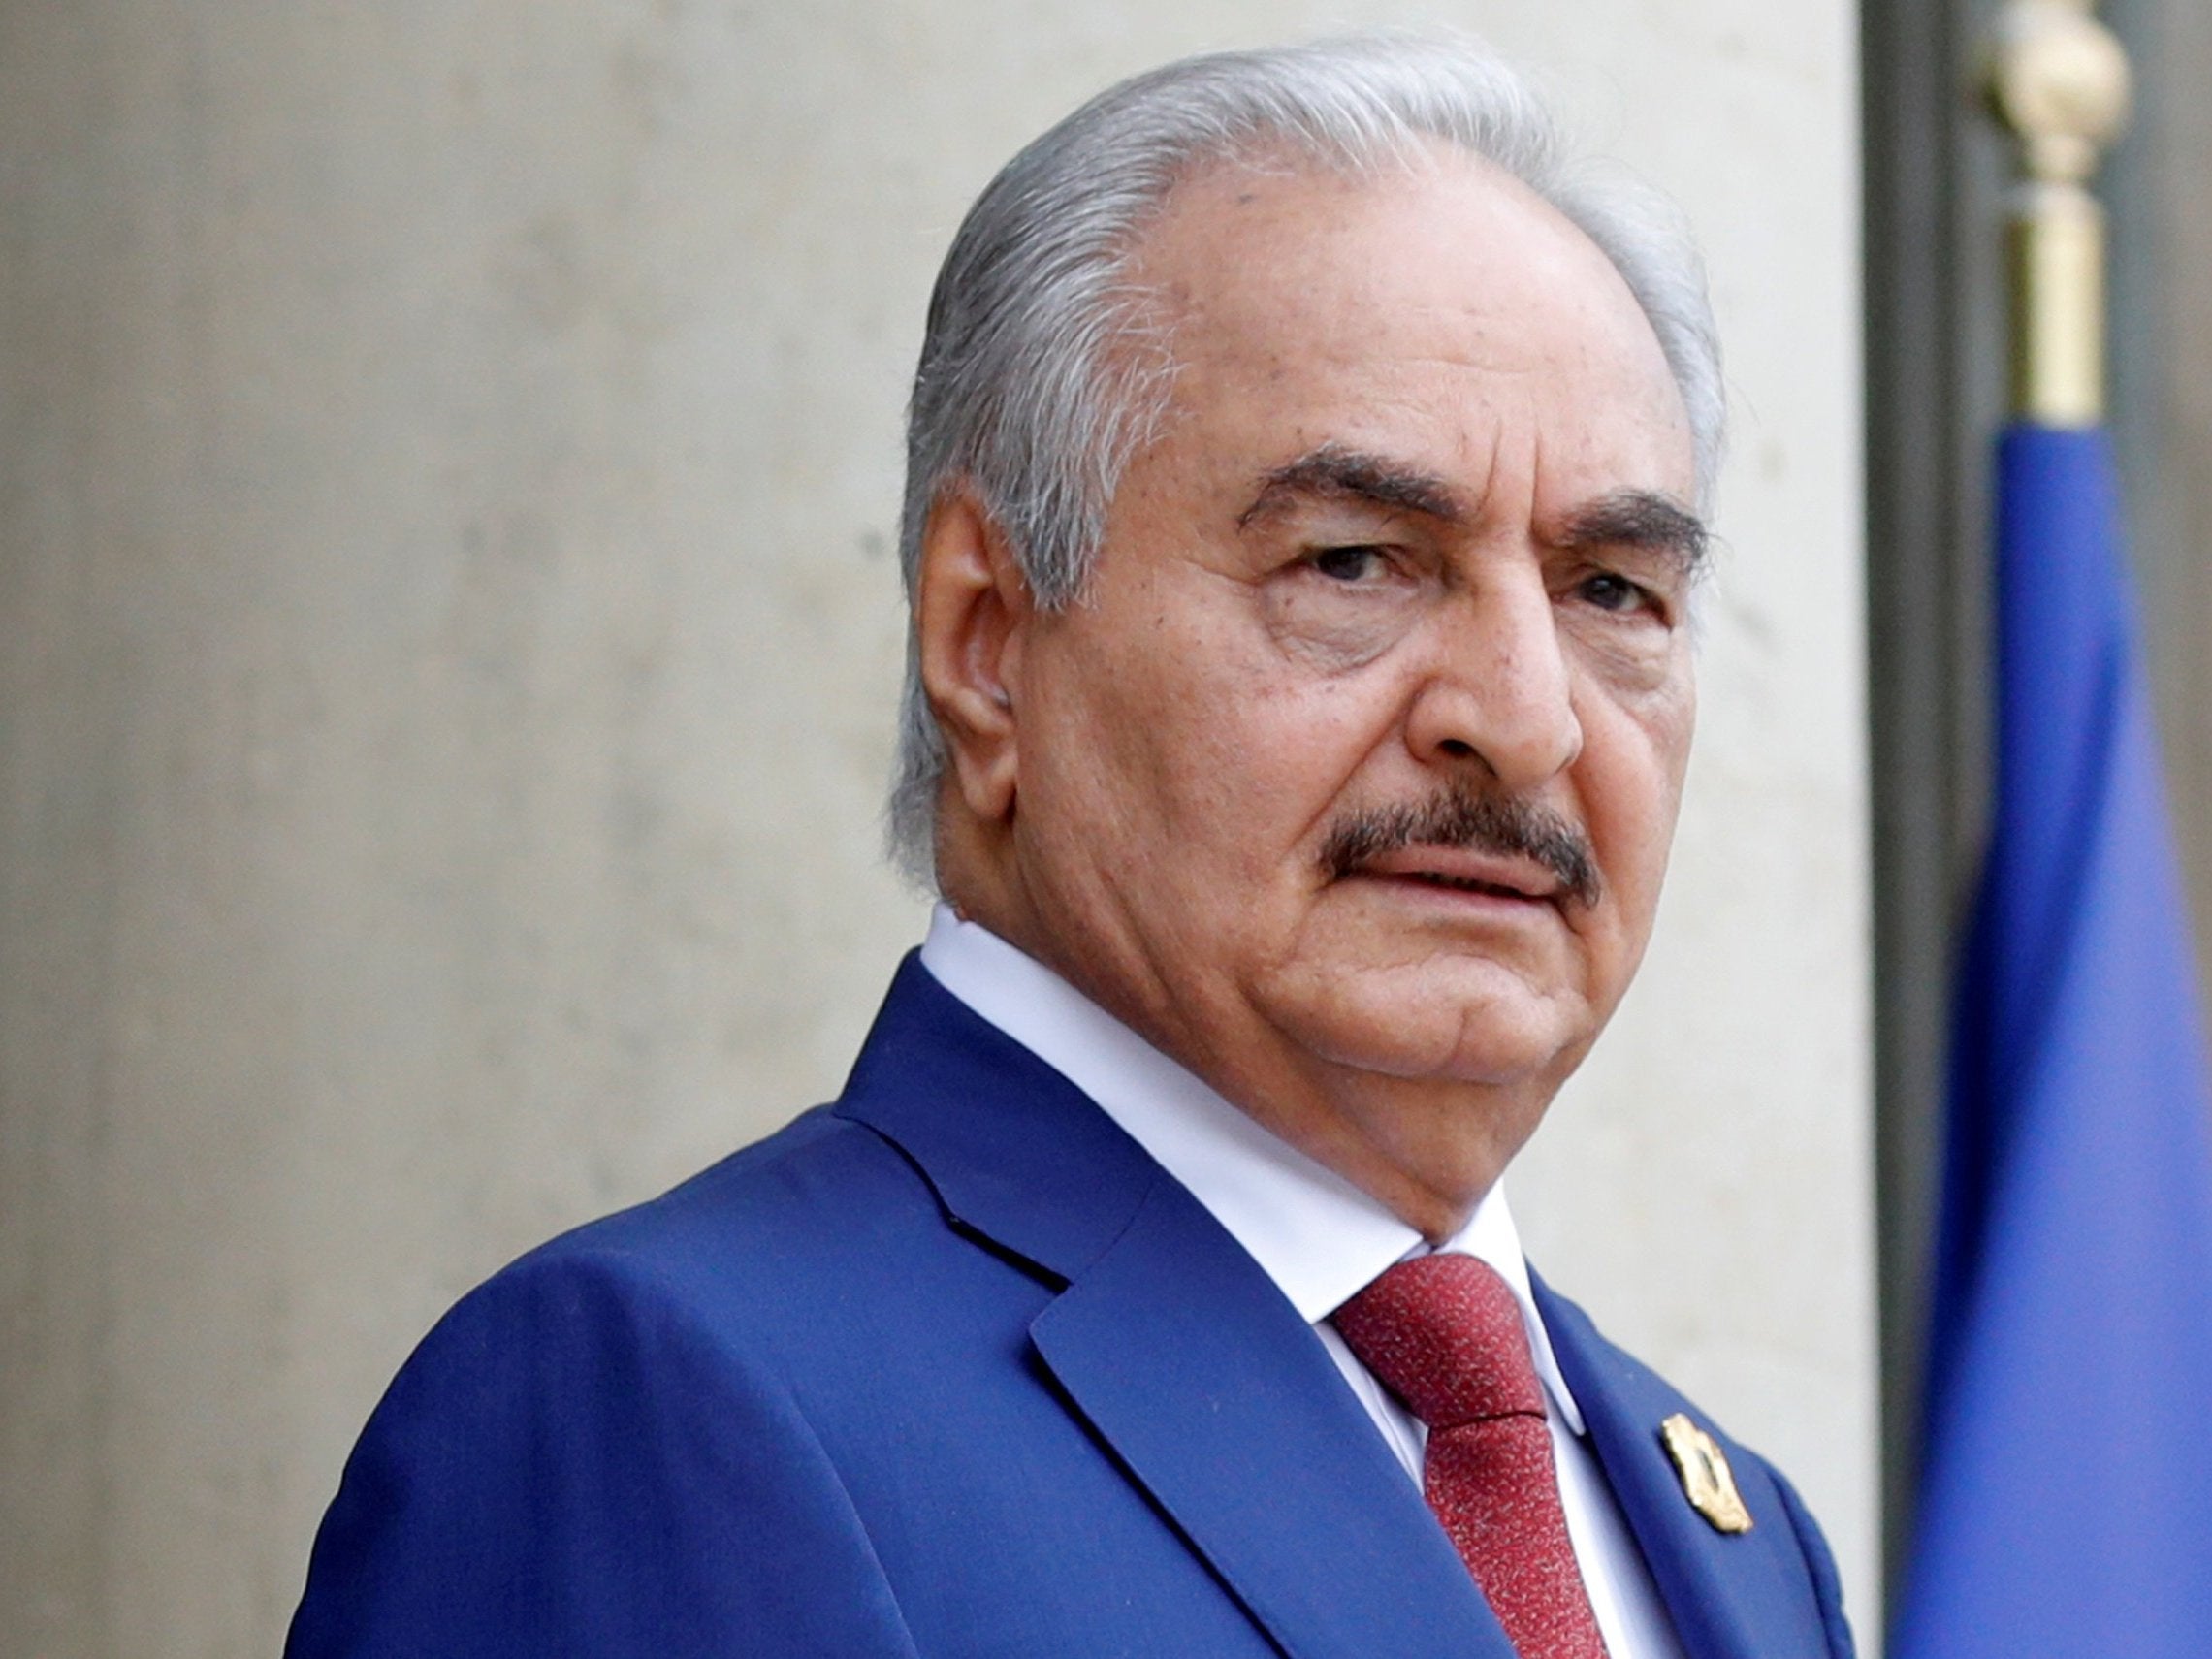 The International Criminal Court said war crimes have been likely been committed by members of Haftar’s forces